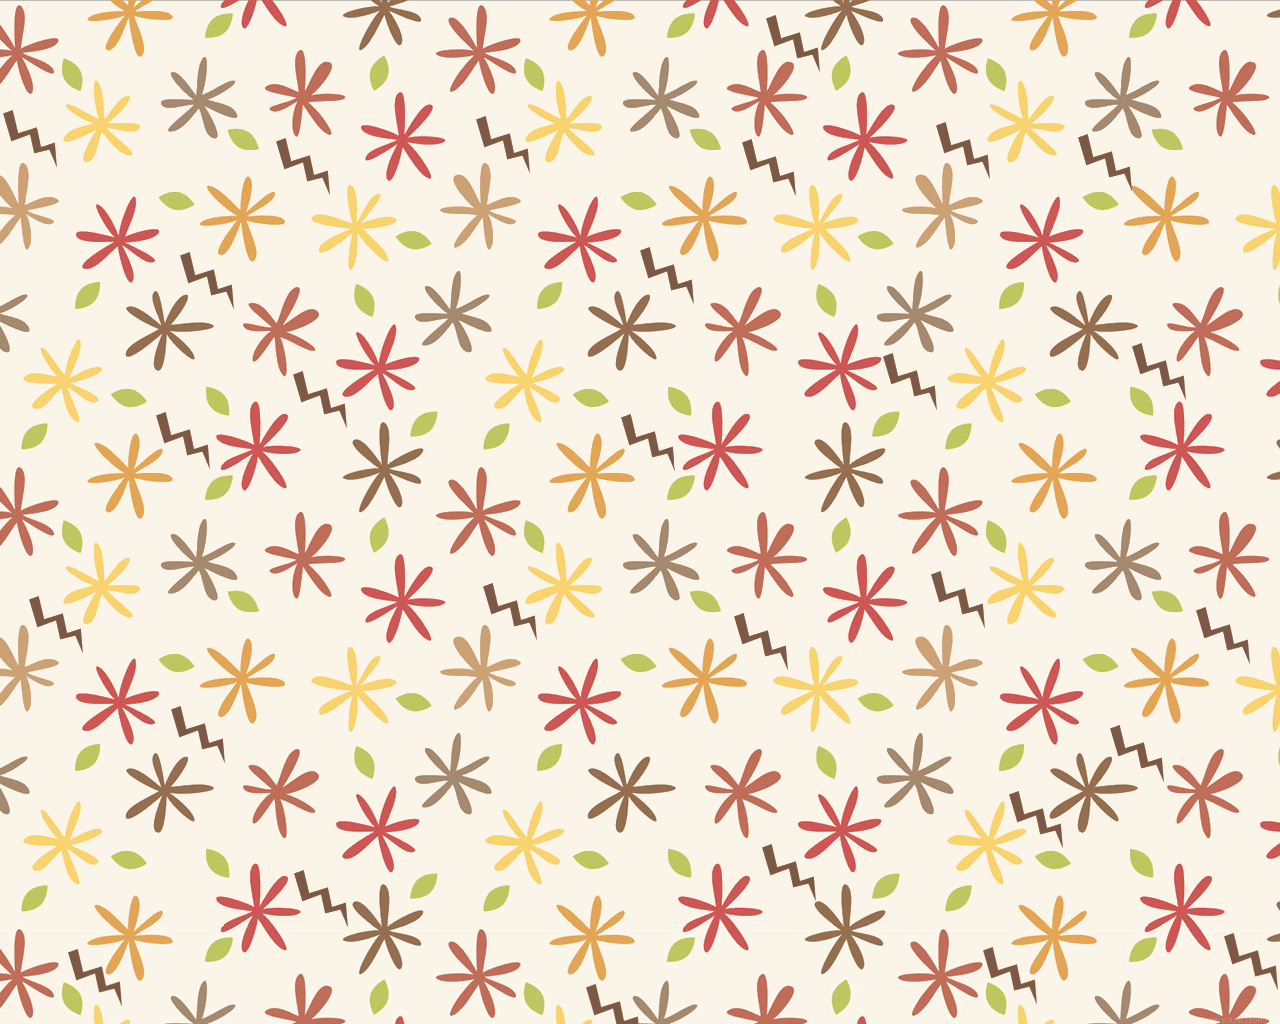  Floral Patterns Posts Cute Backgrounds Repeat Backgrounds Flowers